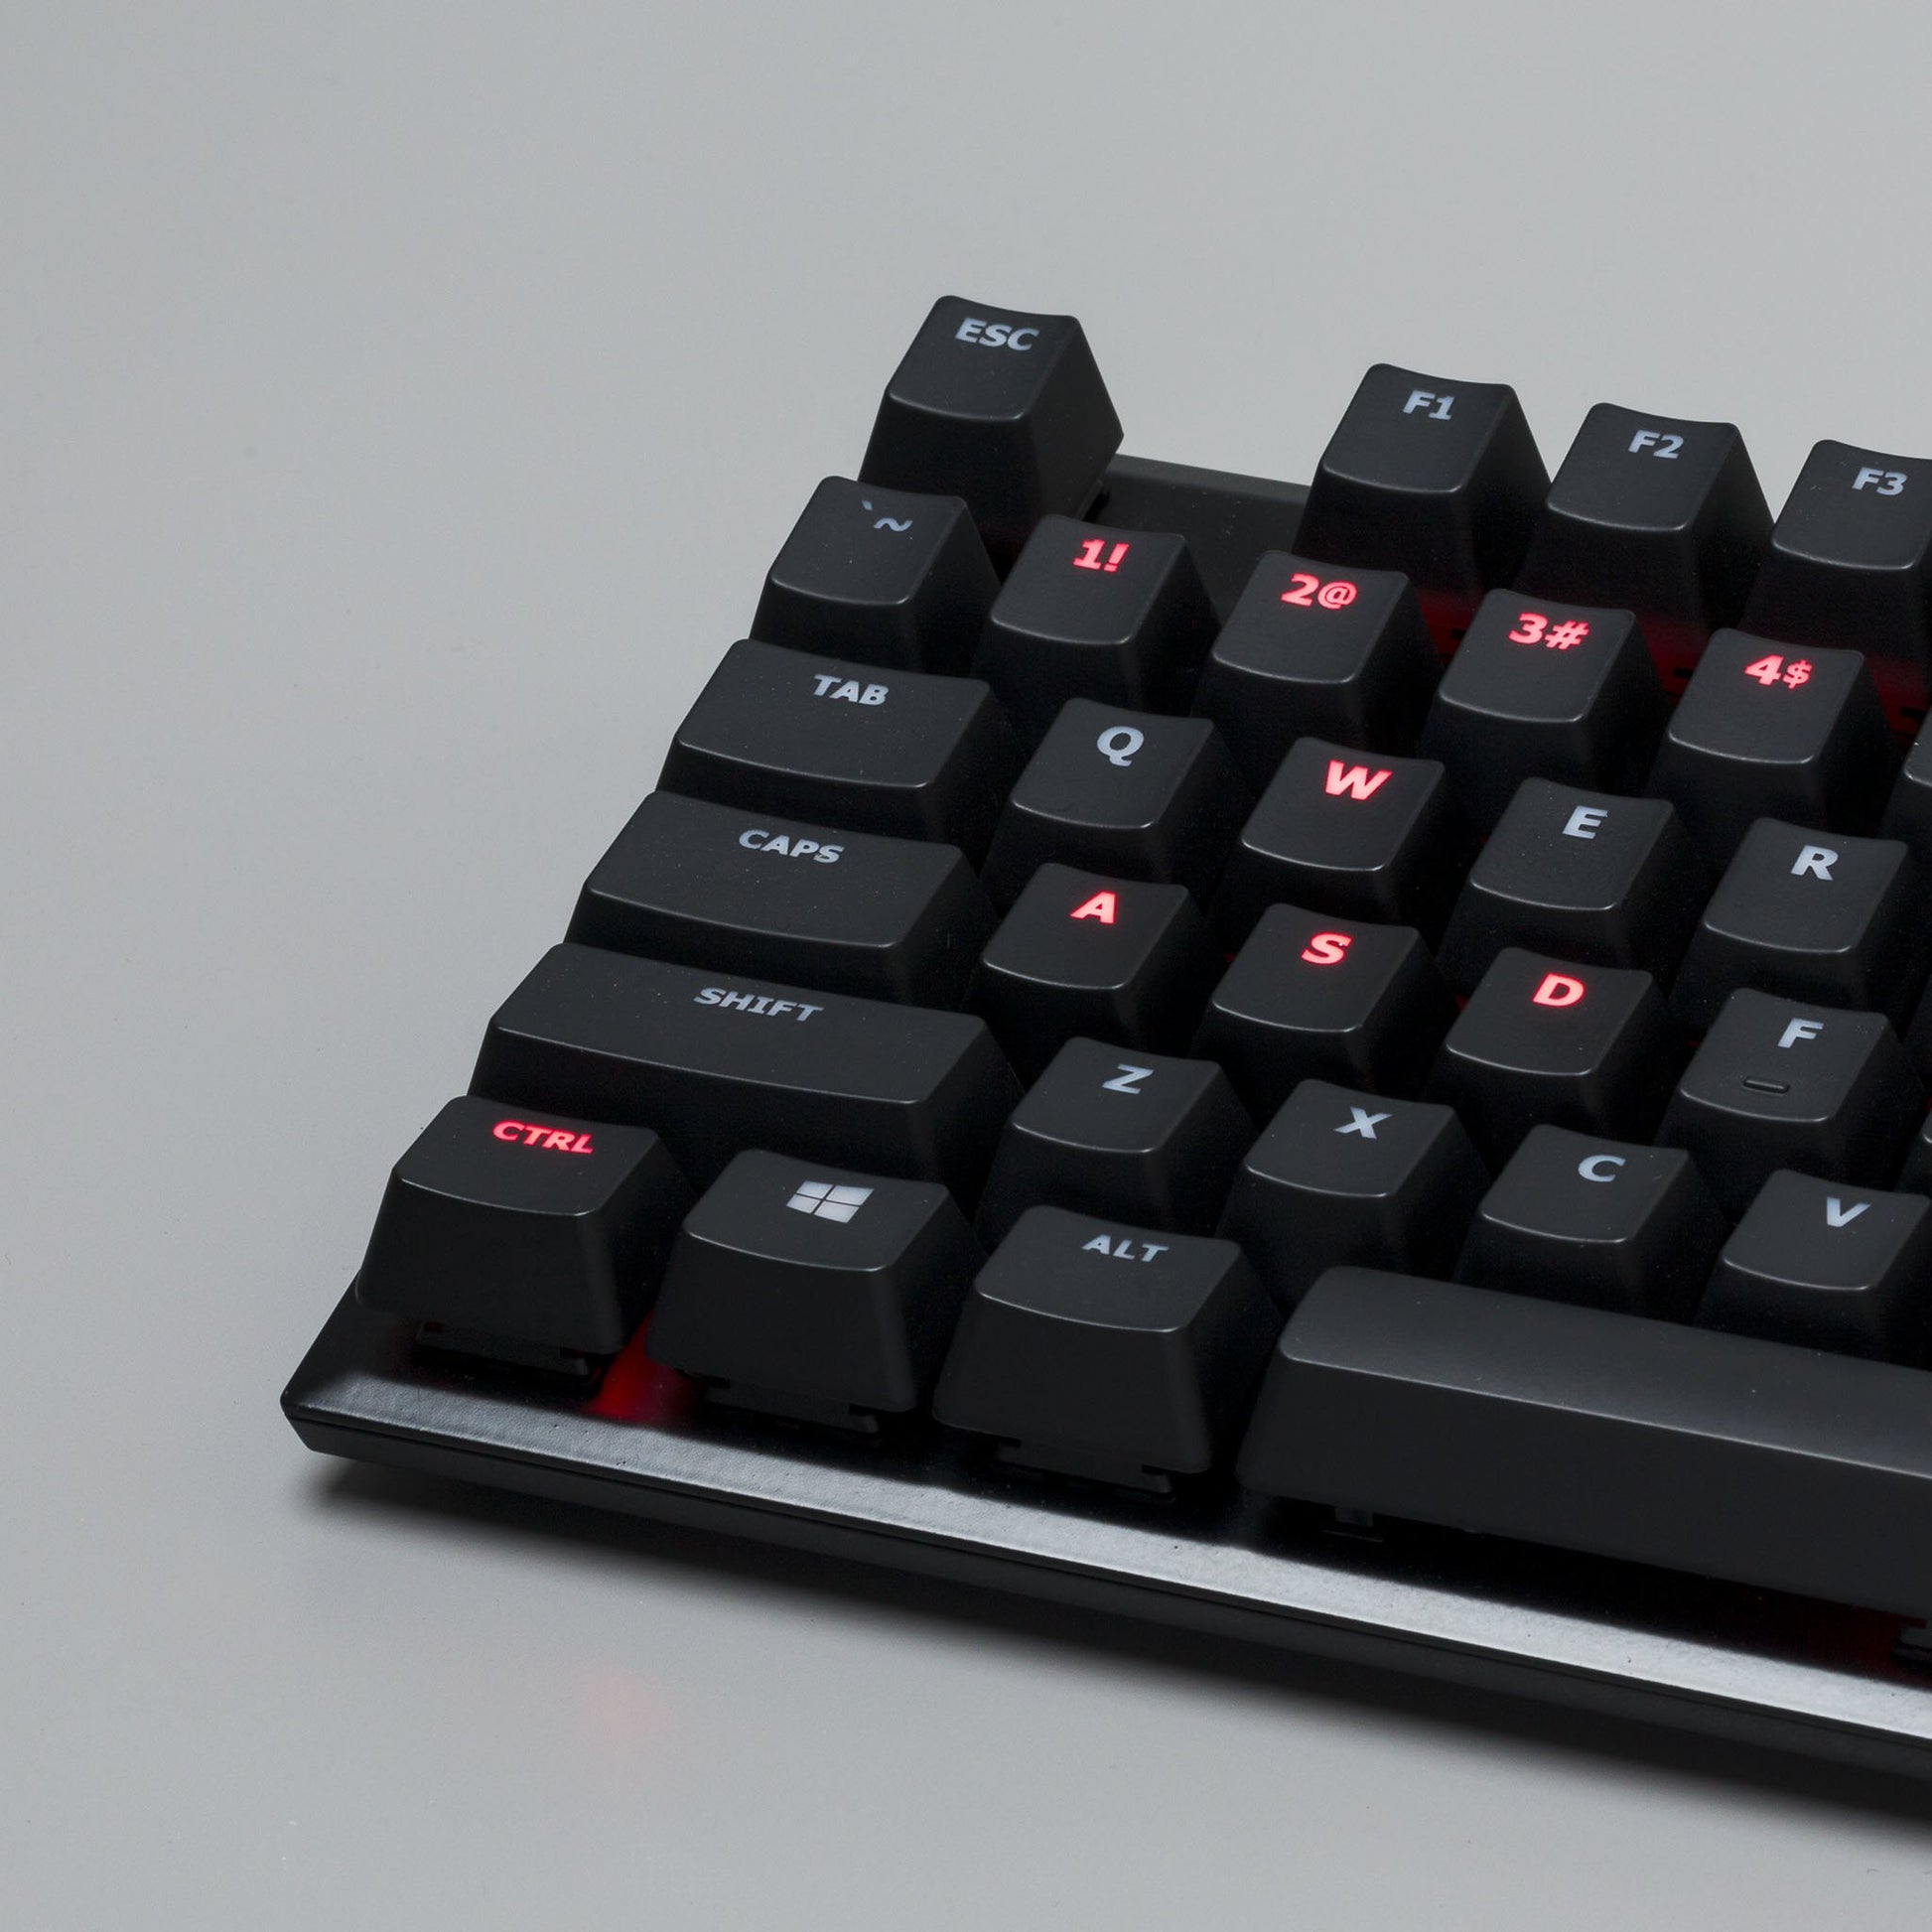 HyperX Alloy FPS Pro Mechanical Gaming Keyboard Red